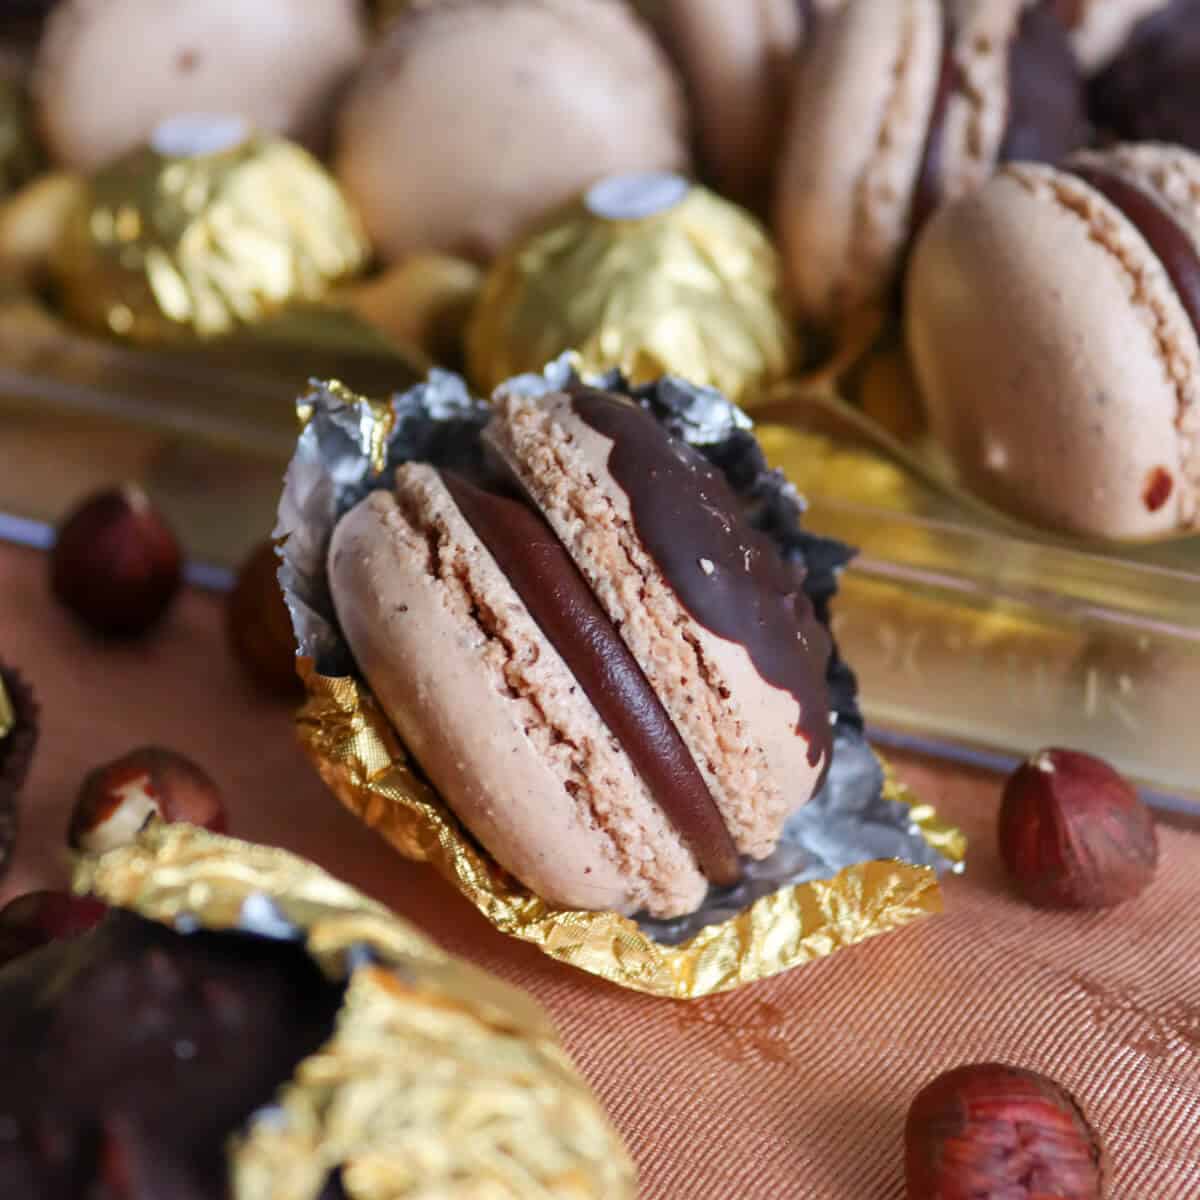 A gold foil wrapper with a macaron inside it.